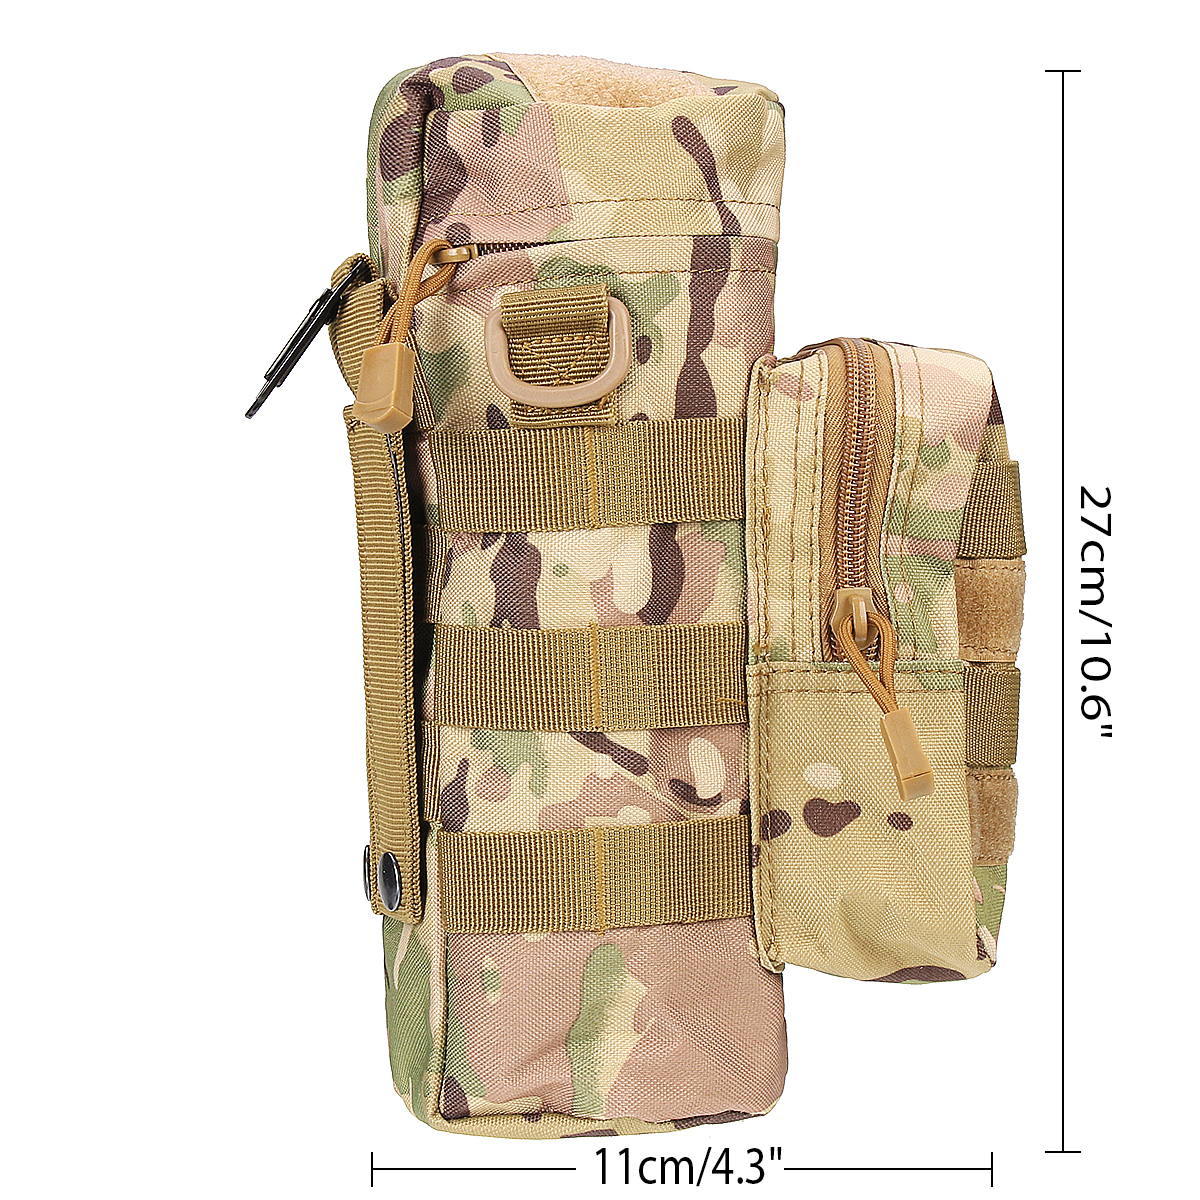 Multifunctional-Water-Bottle-Bag-Outdoor-Tactical-Bag-Sports-Hiking-Climbing-Package-Kettle-Bag-1484982-2